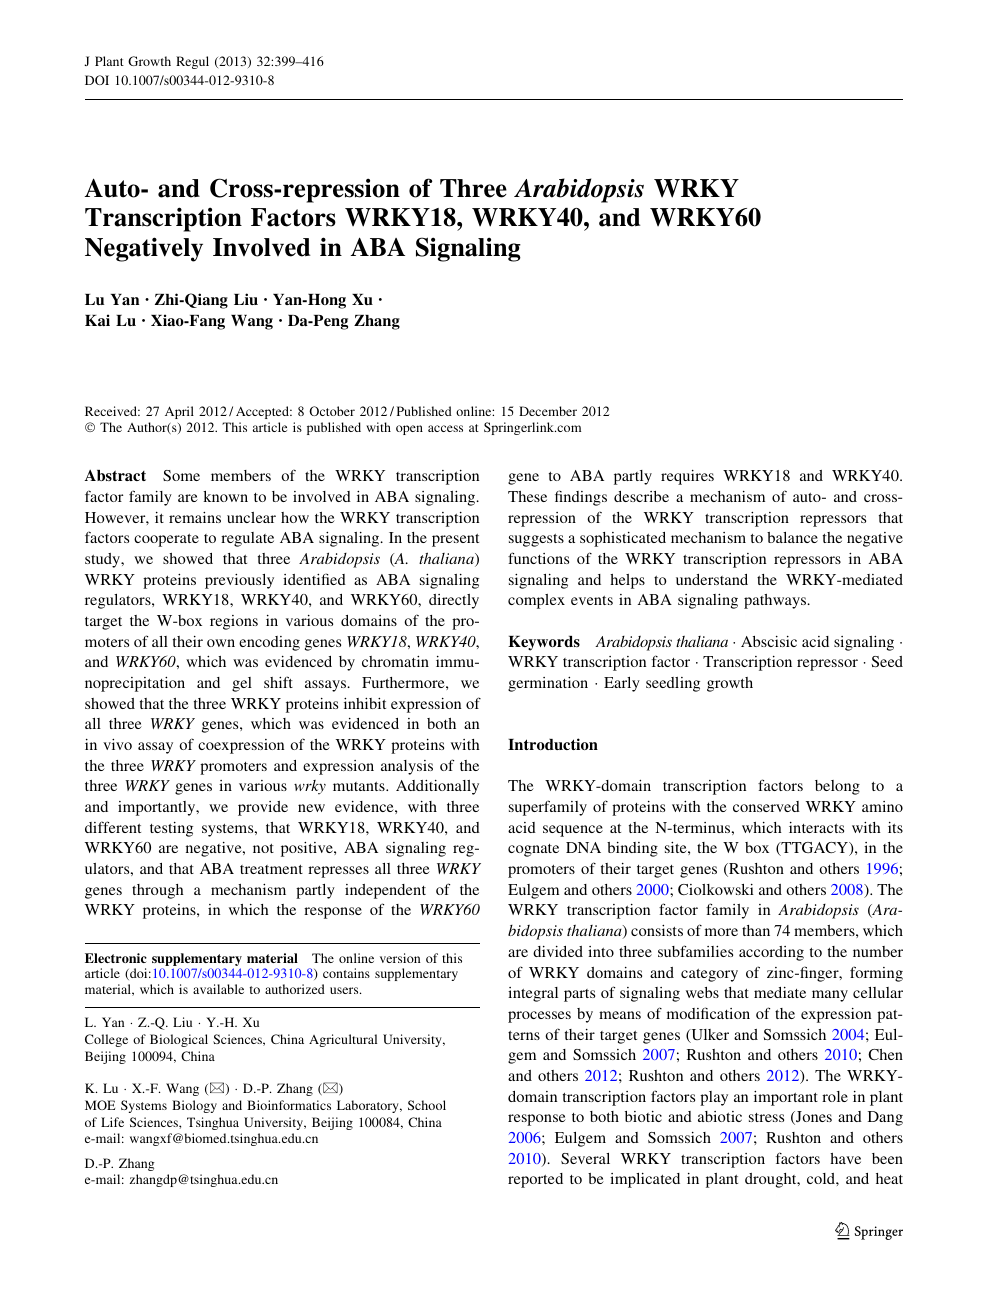 Auto And Cross Repression Of Three Arabidopsis Wrky Transcription Factors Wrky18 Wrky40 And Wrky60 Negatively Involved In Aba Signaling Topic Of Research Paper In Biological Sciences Download Scholarly Article Pdf And Read